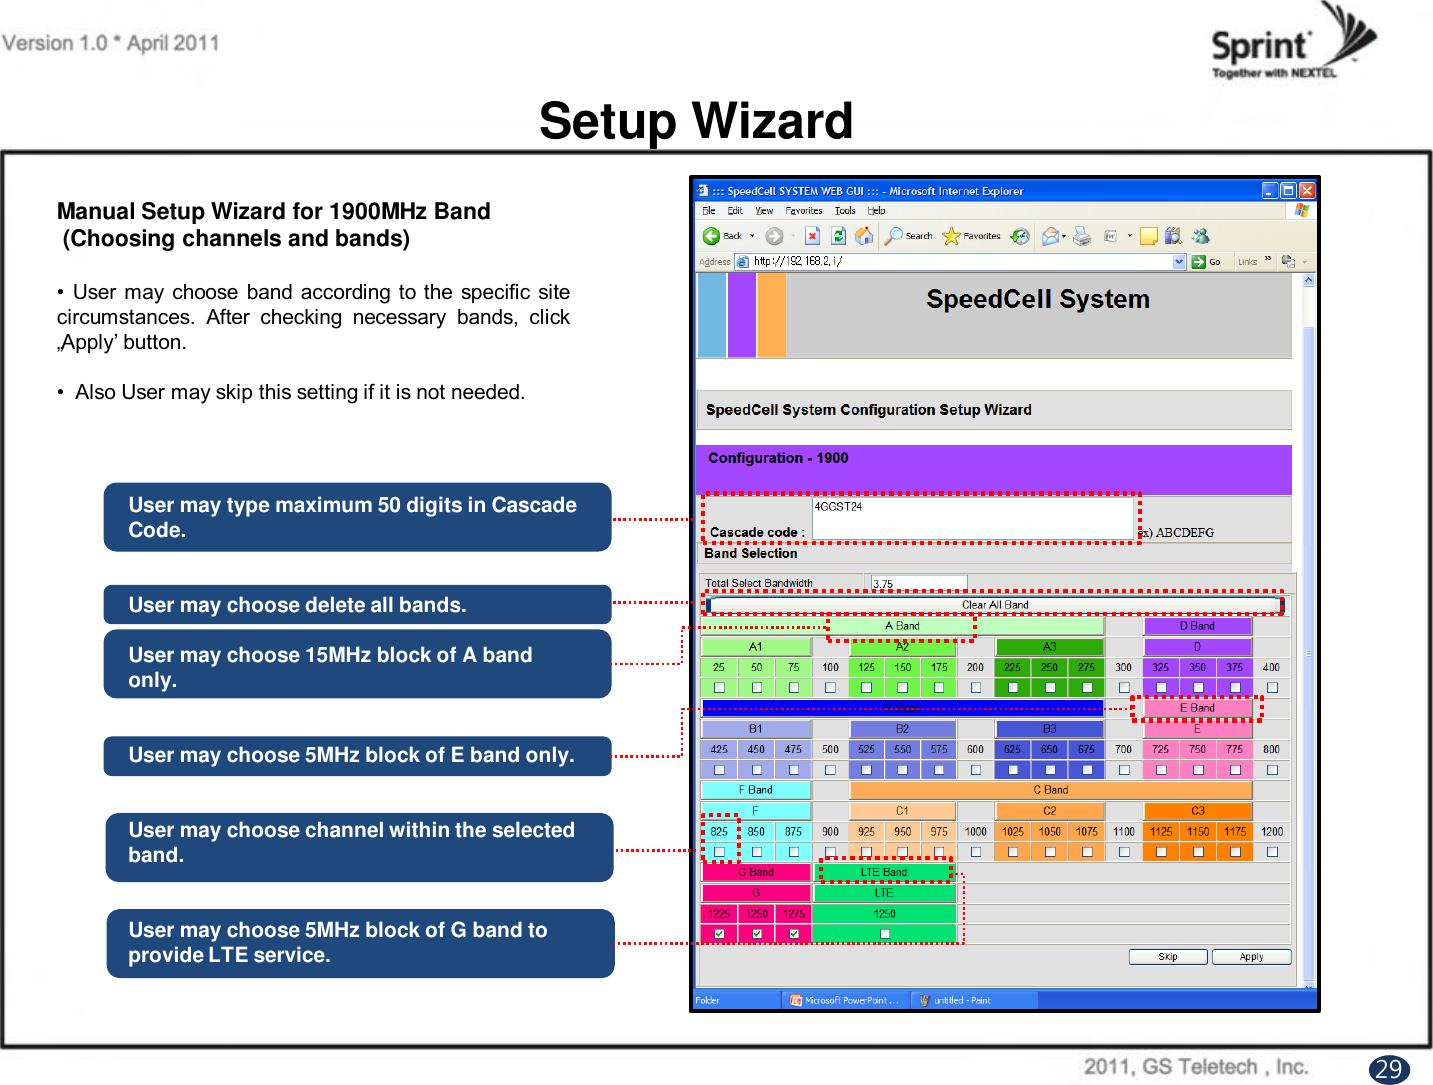 Setup WizardManual Setup Wizard for 1900MHz Band(Choosing channels and bands)• User may choose band according to the specific sitecircumstances. After checking necessary bands, click„Apply‟ button.• Also User may skip this setting if it is not needed.User may type maximum 50 digits in Cascade Code.User may choose delete all bands.User may choose 15MHz block of A band only.User may choose 5MHz block of E band only.User may choose channel within the selected band.User may choose 5MHz block of G band toprovide LTE service.29